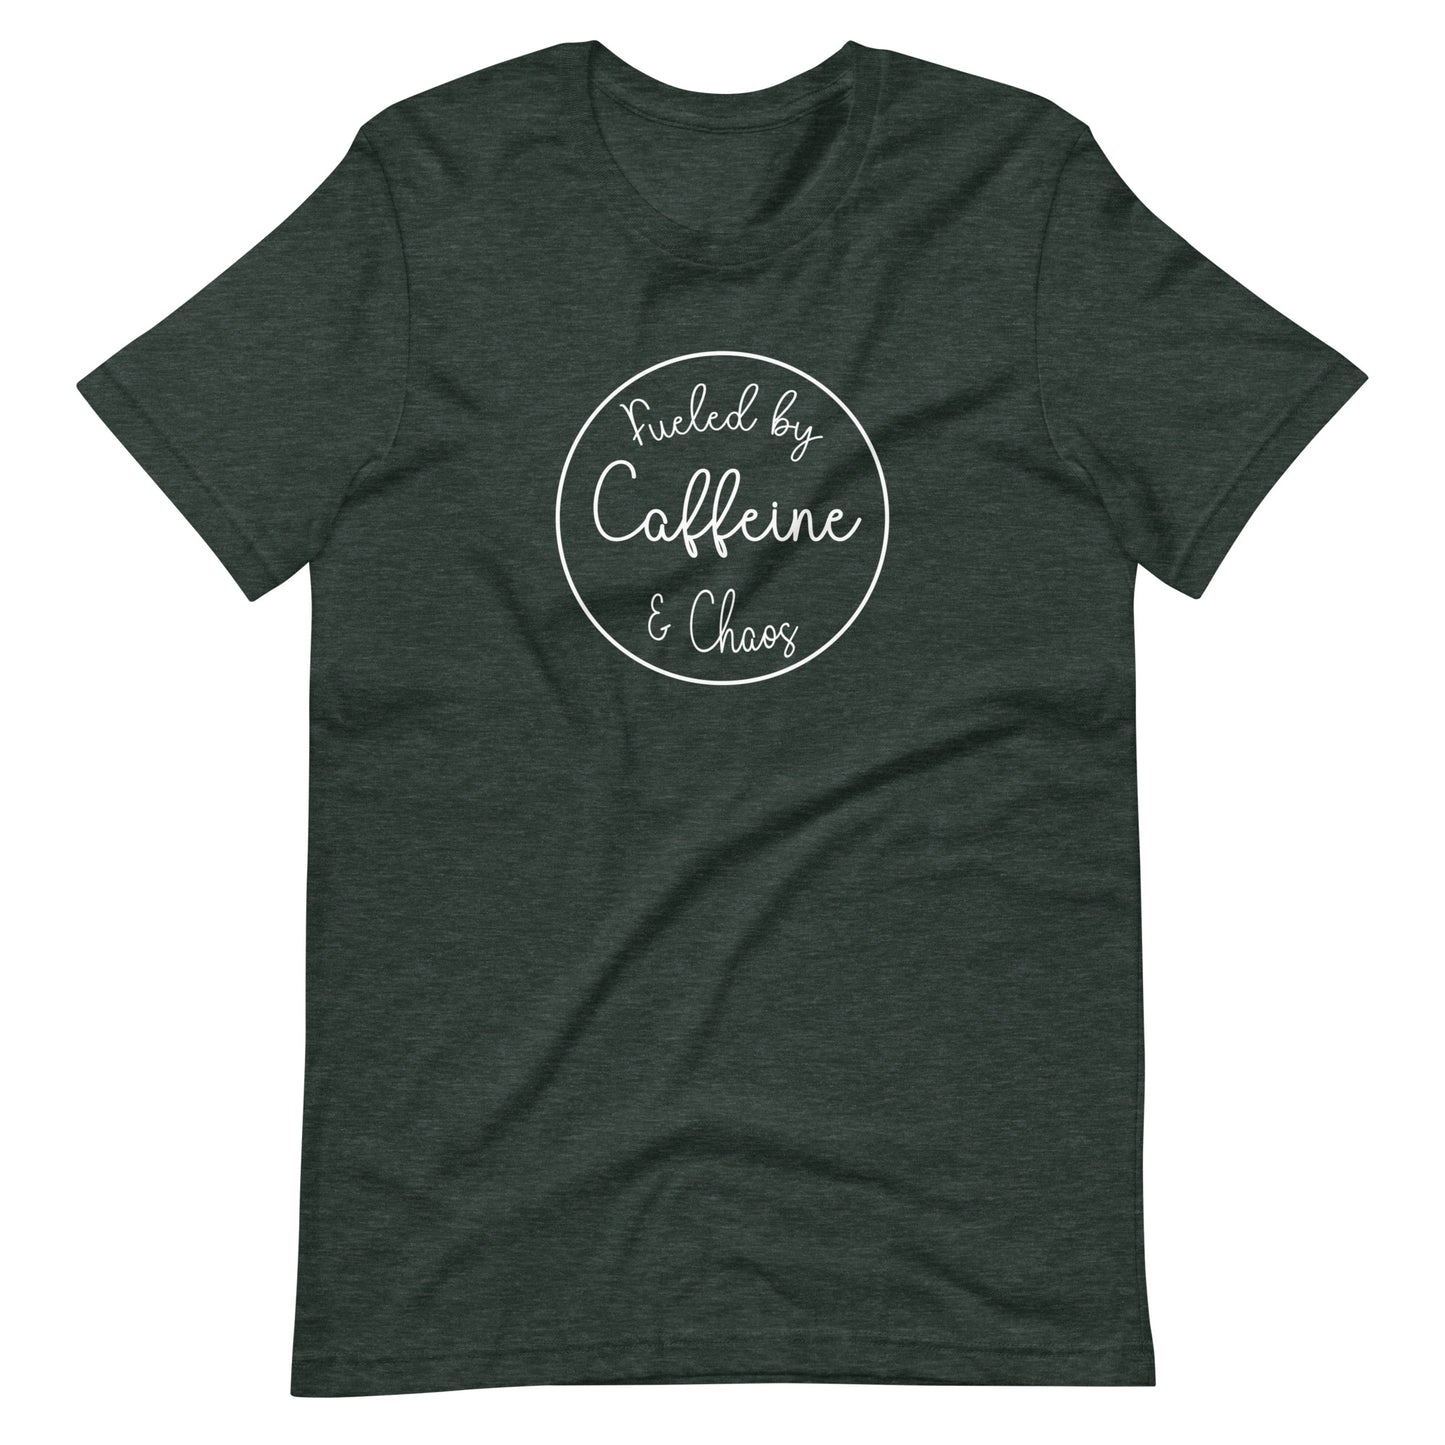 Fueled by Caffeine & Chaos unisex t-shirt